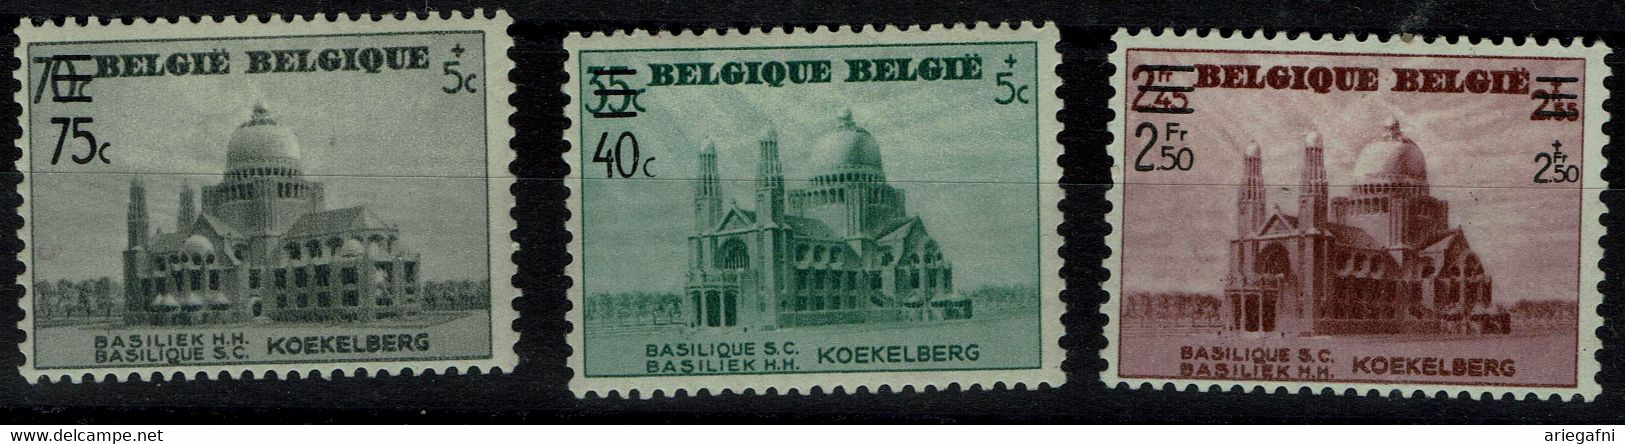 BELGIUM 1938 FUND FOR THE COMPLETION OF THE BASILICA OF KOEKELBERG MI No 486-8 MLH VF !! - 1929-1941 Big Montenez